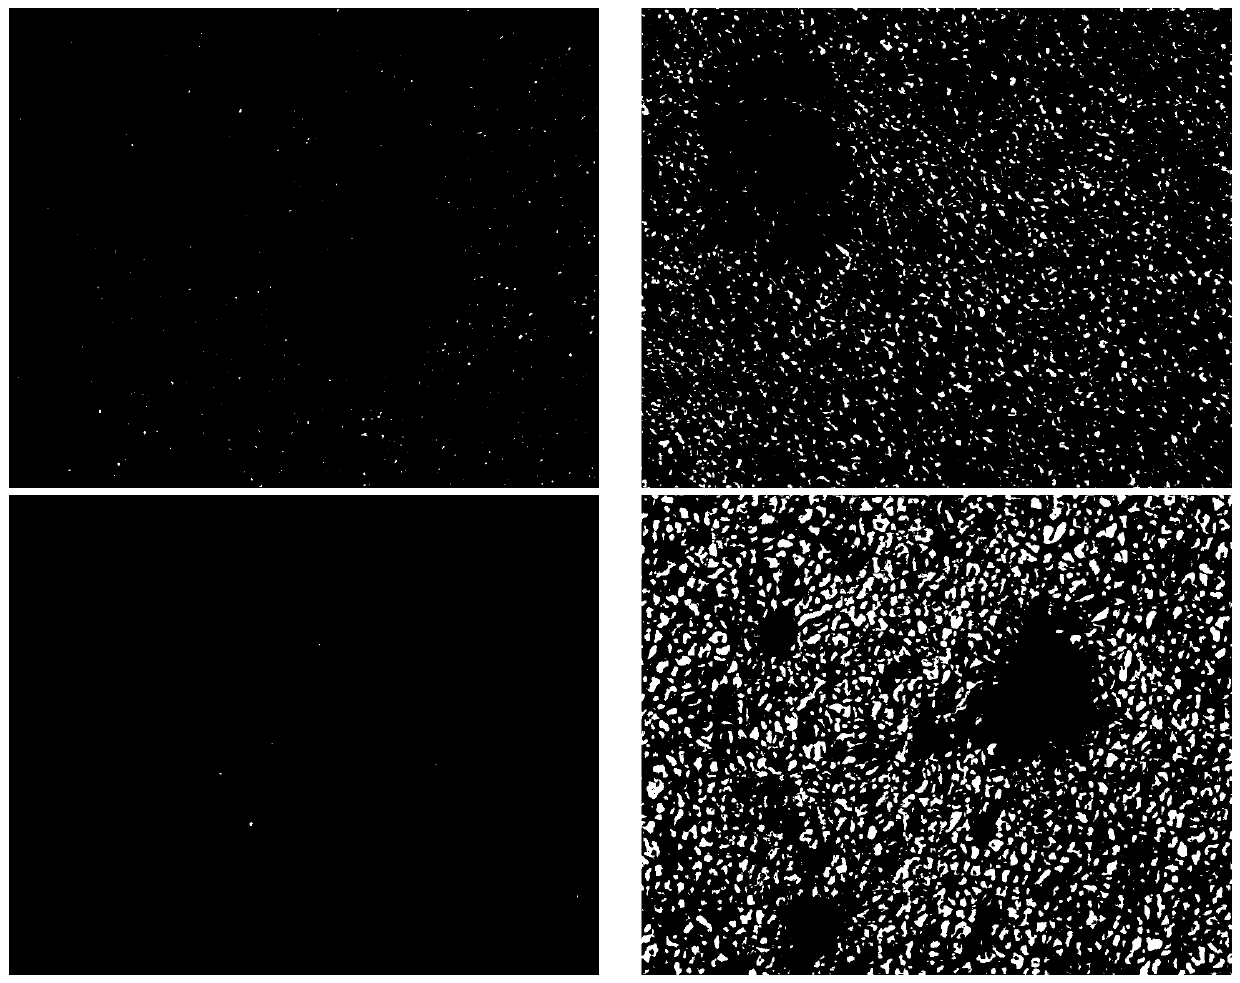 a solar image registration method based on normalized cross-correlation and SIFT